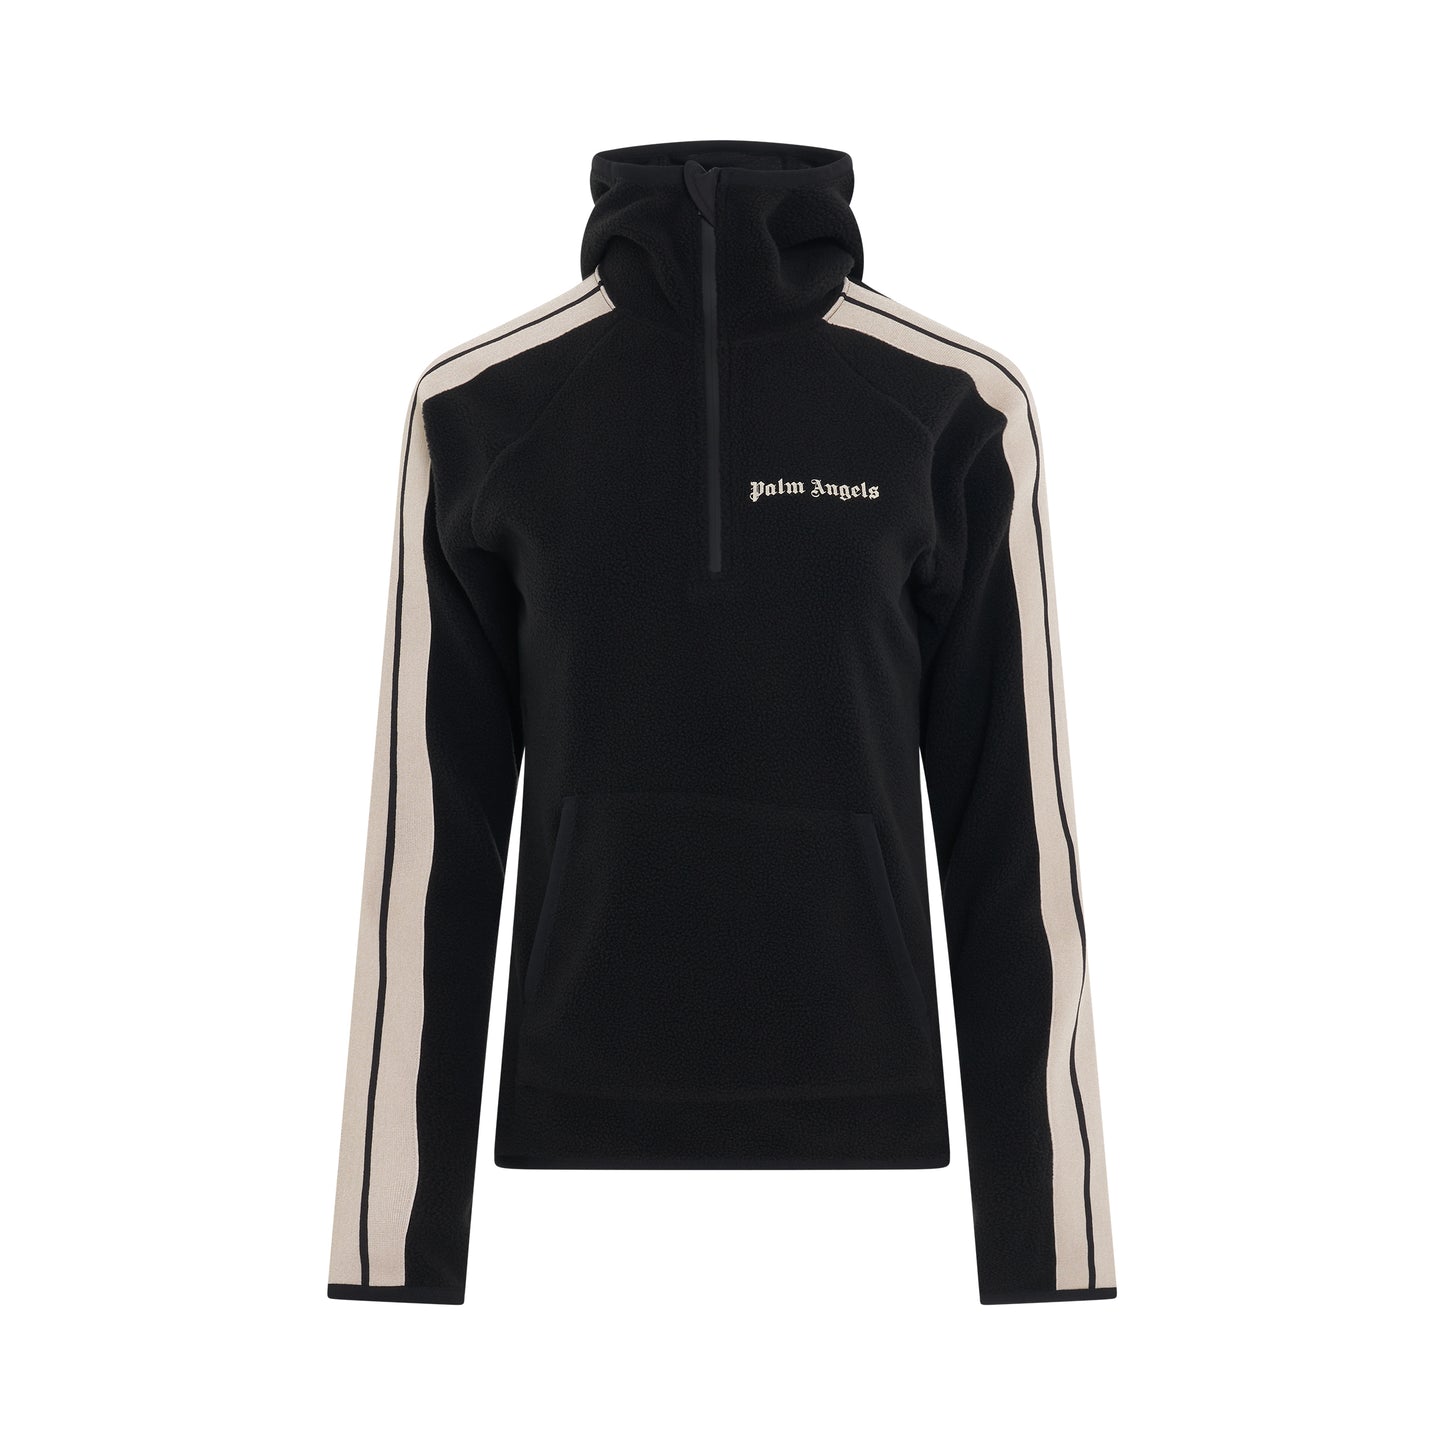 Pile Track Jacket Mid Layer in Black/White